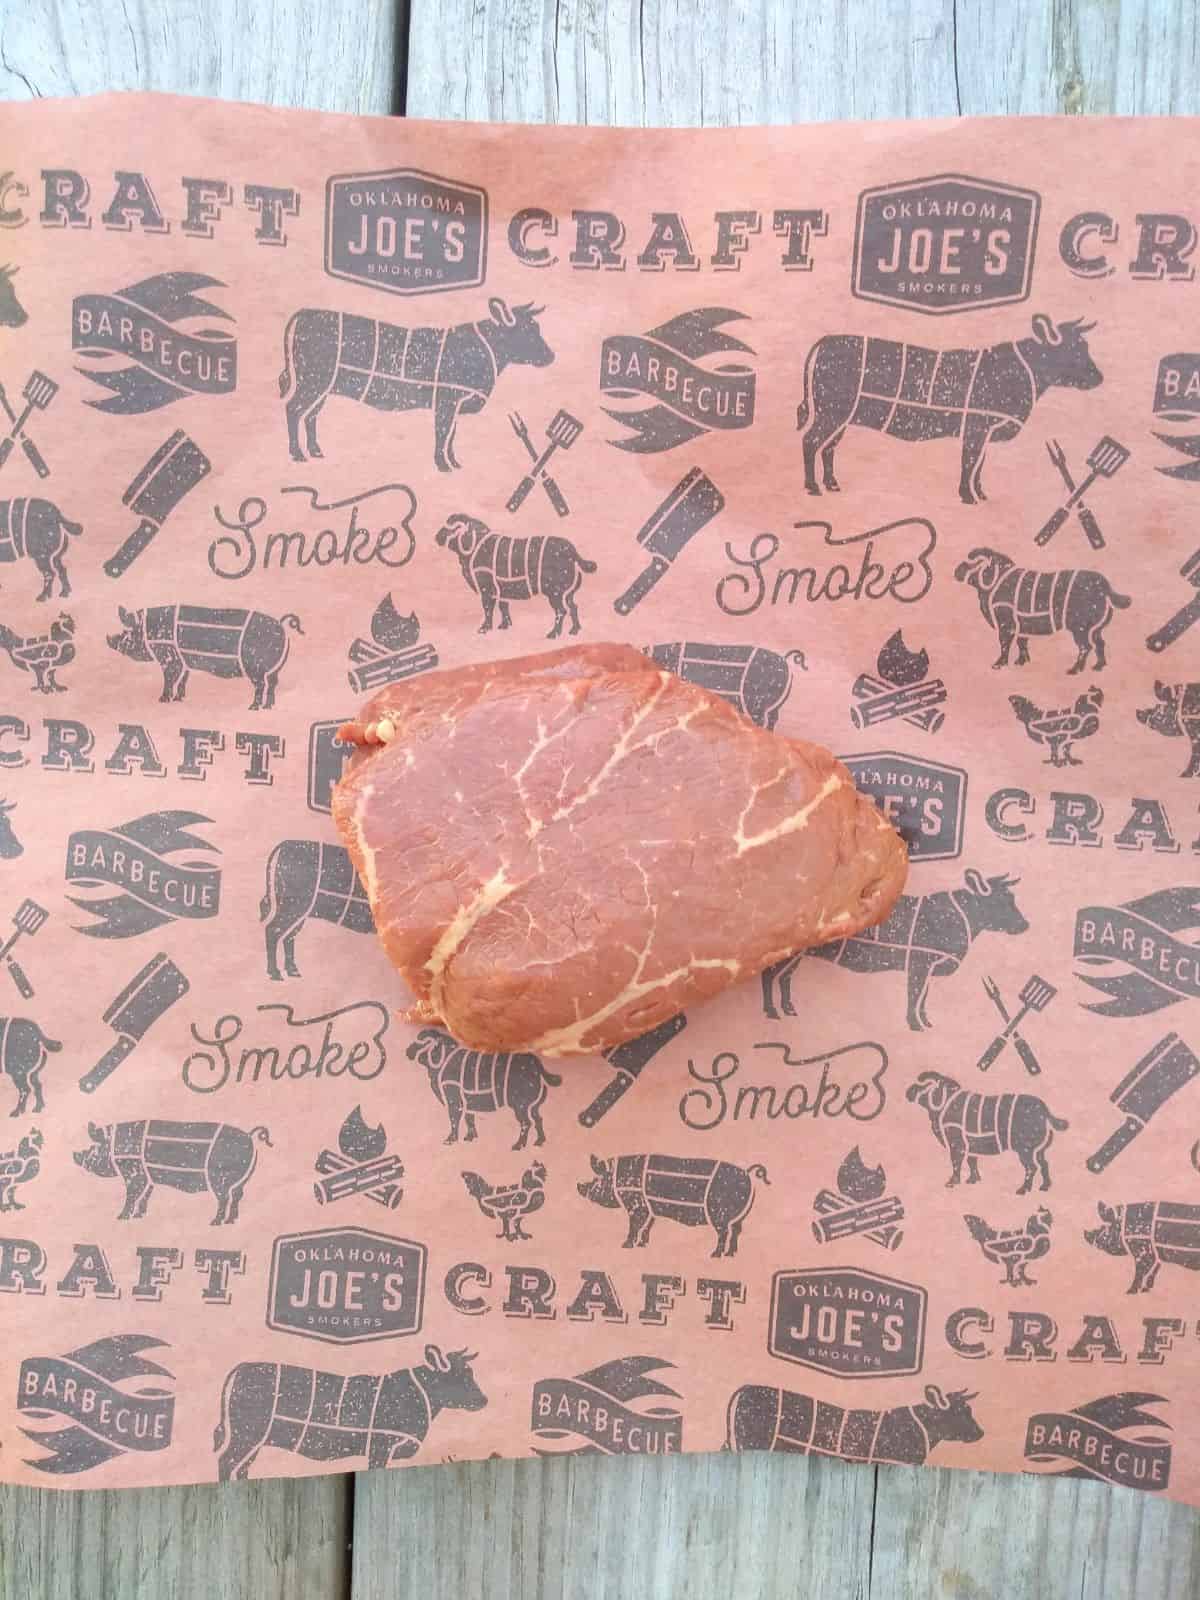 A raw top sirloin filet steak on a piece of buttering paper with grilling symbols on it, sitting on top of a wood picnic table.